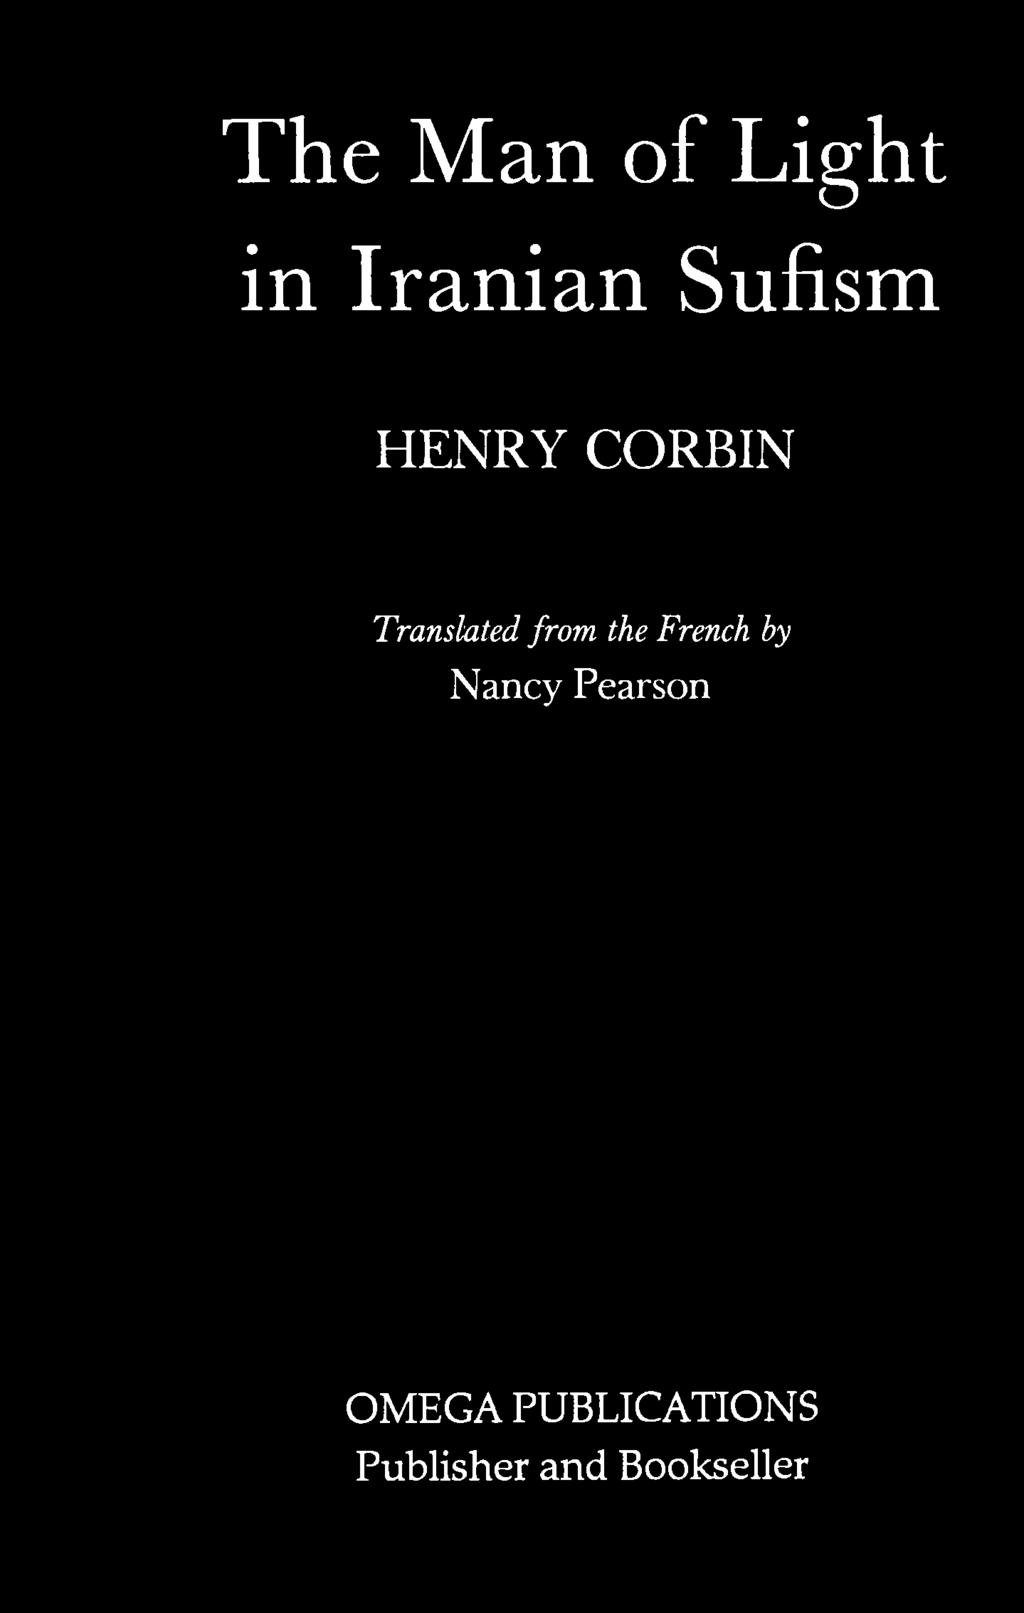 The Man of Light in Iranian Sufism HENRY CORBIN Translated from the